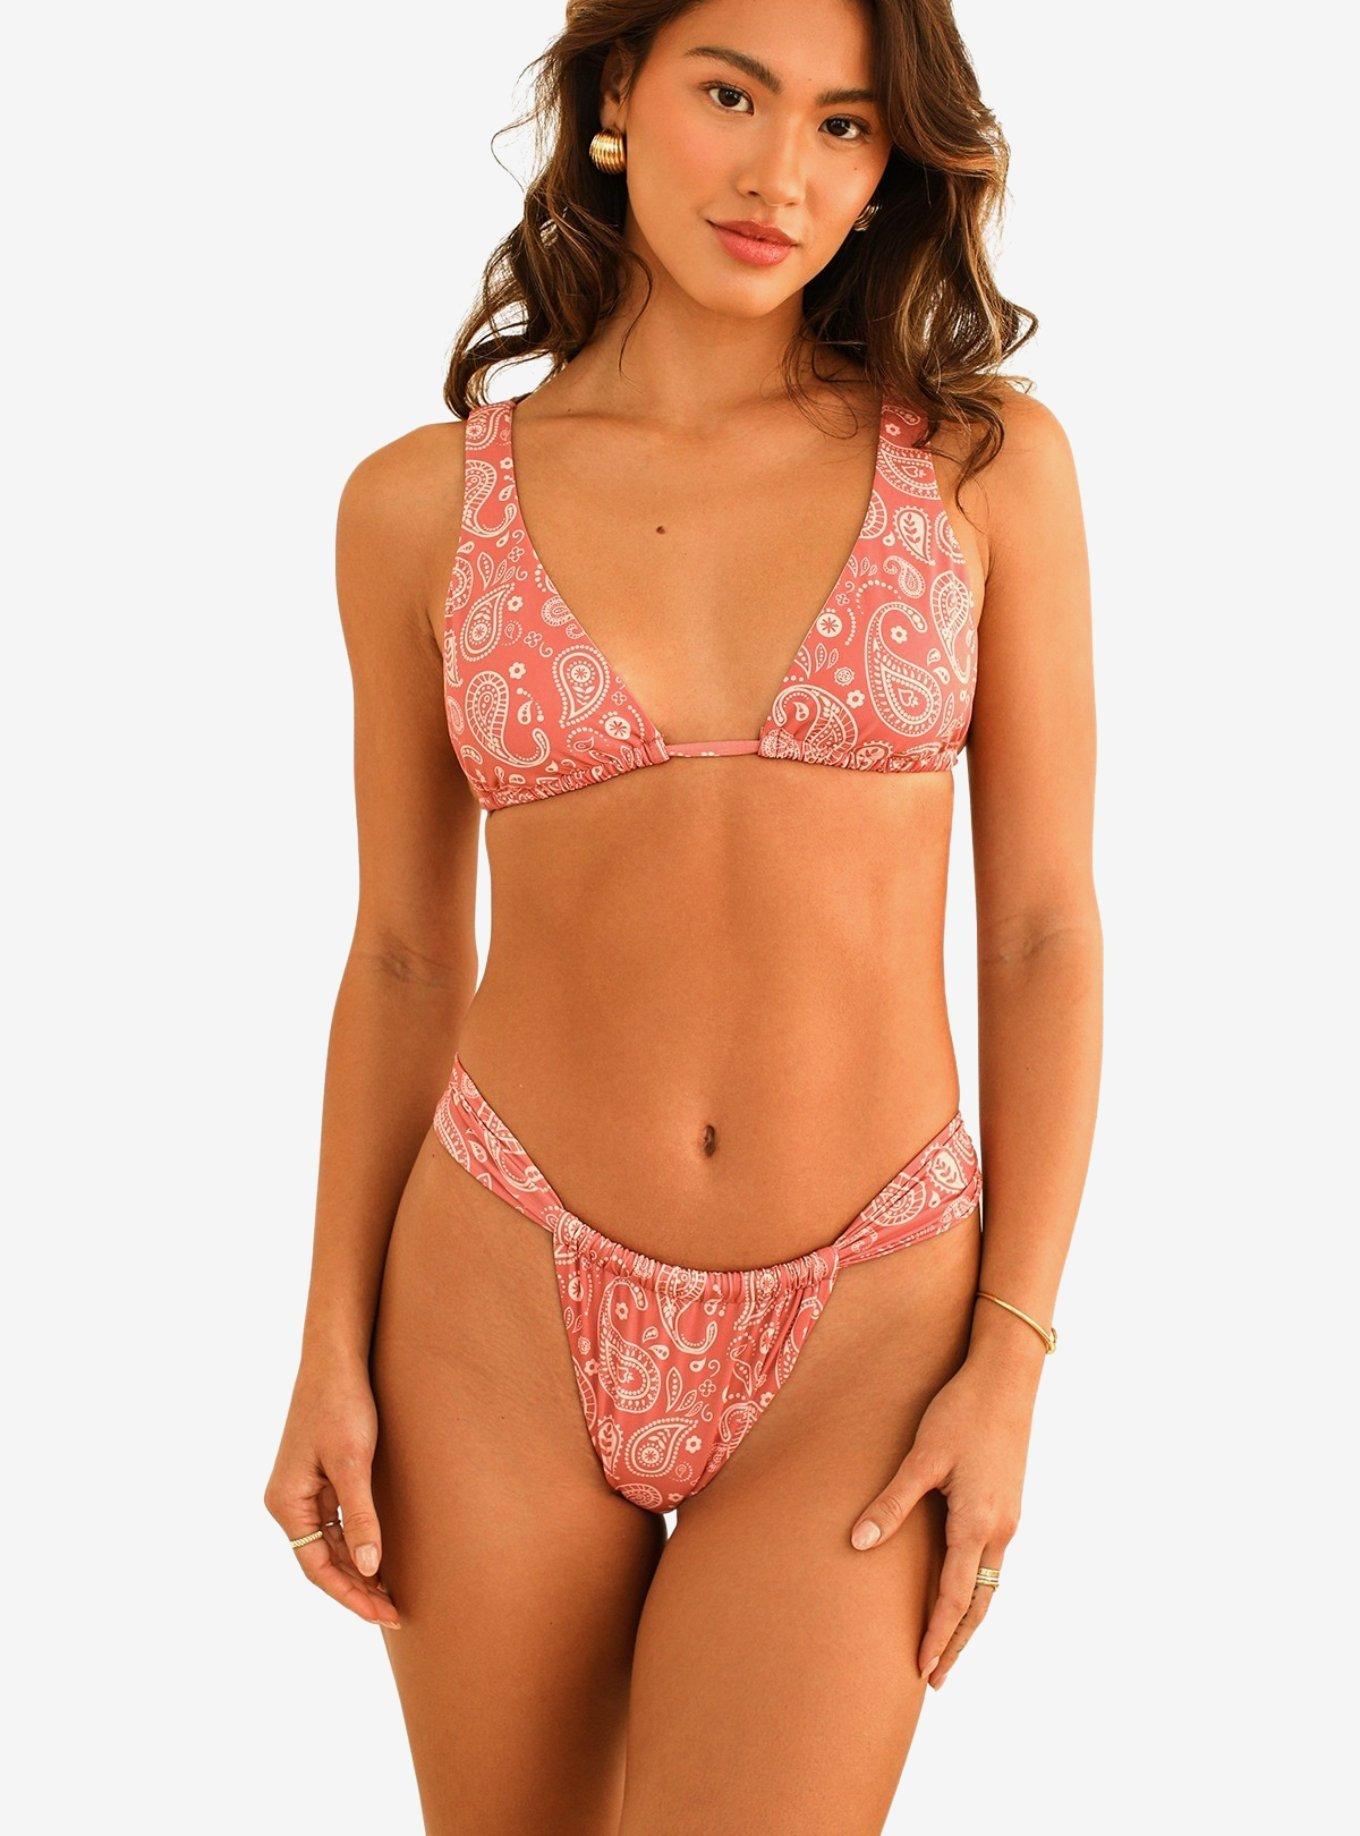 Dippin' Daisy's Descanso Tie Triangle Swim Top Pink Paisley, PAISLEY, alternate